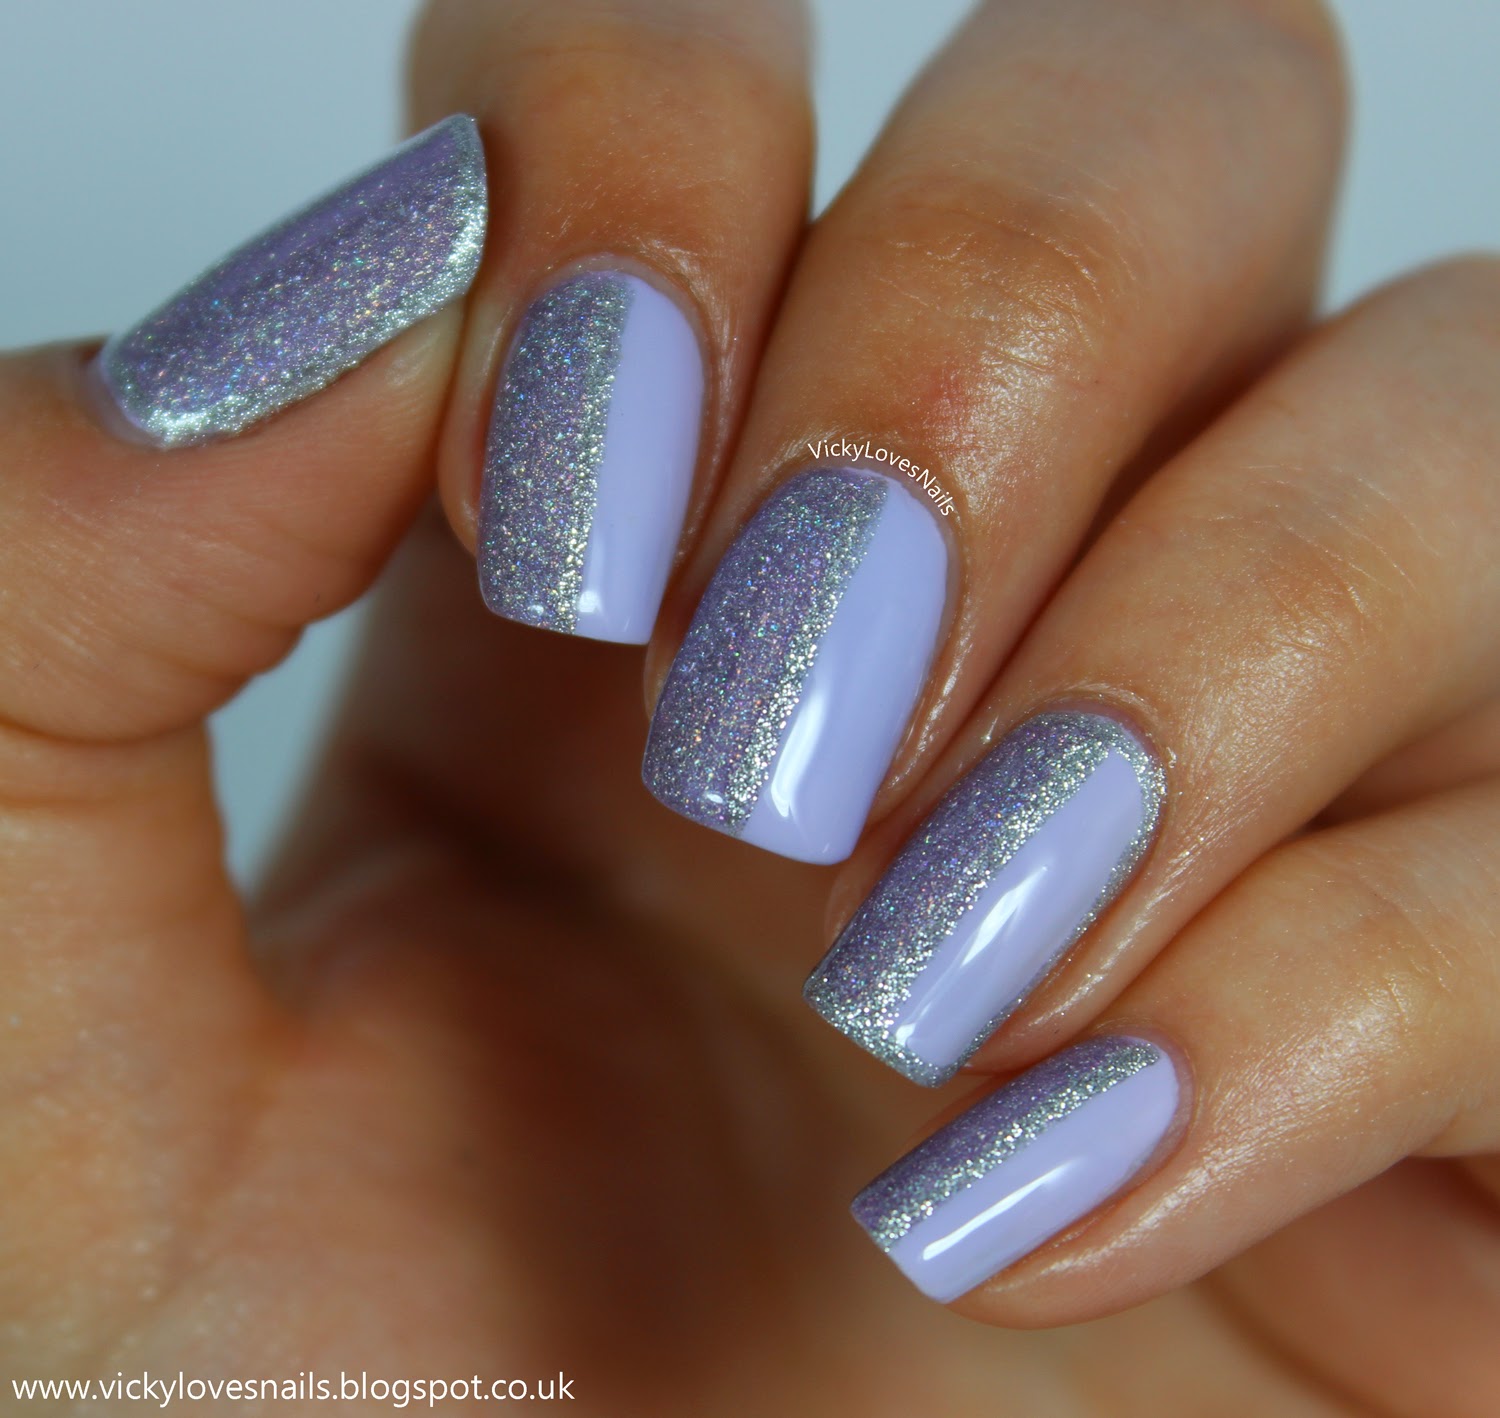 Vicky Loves Nails!: piCture pOlish - Lizzie Nail Art